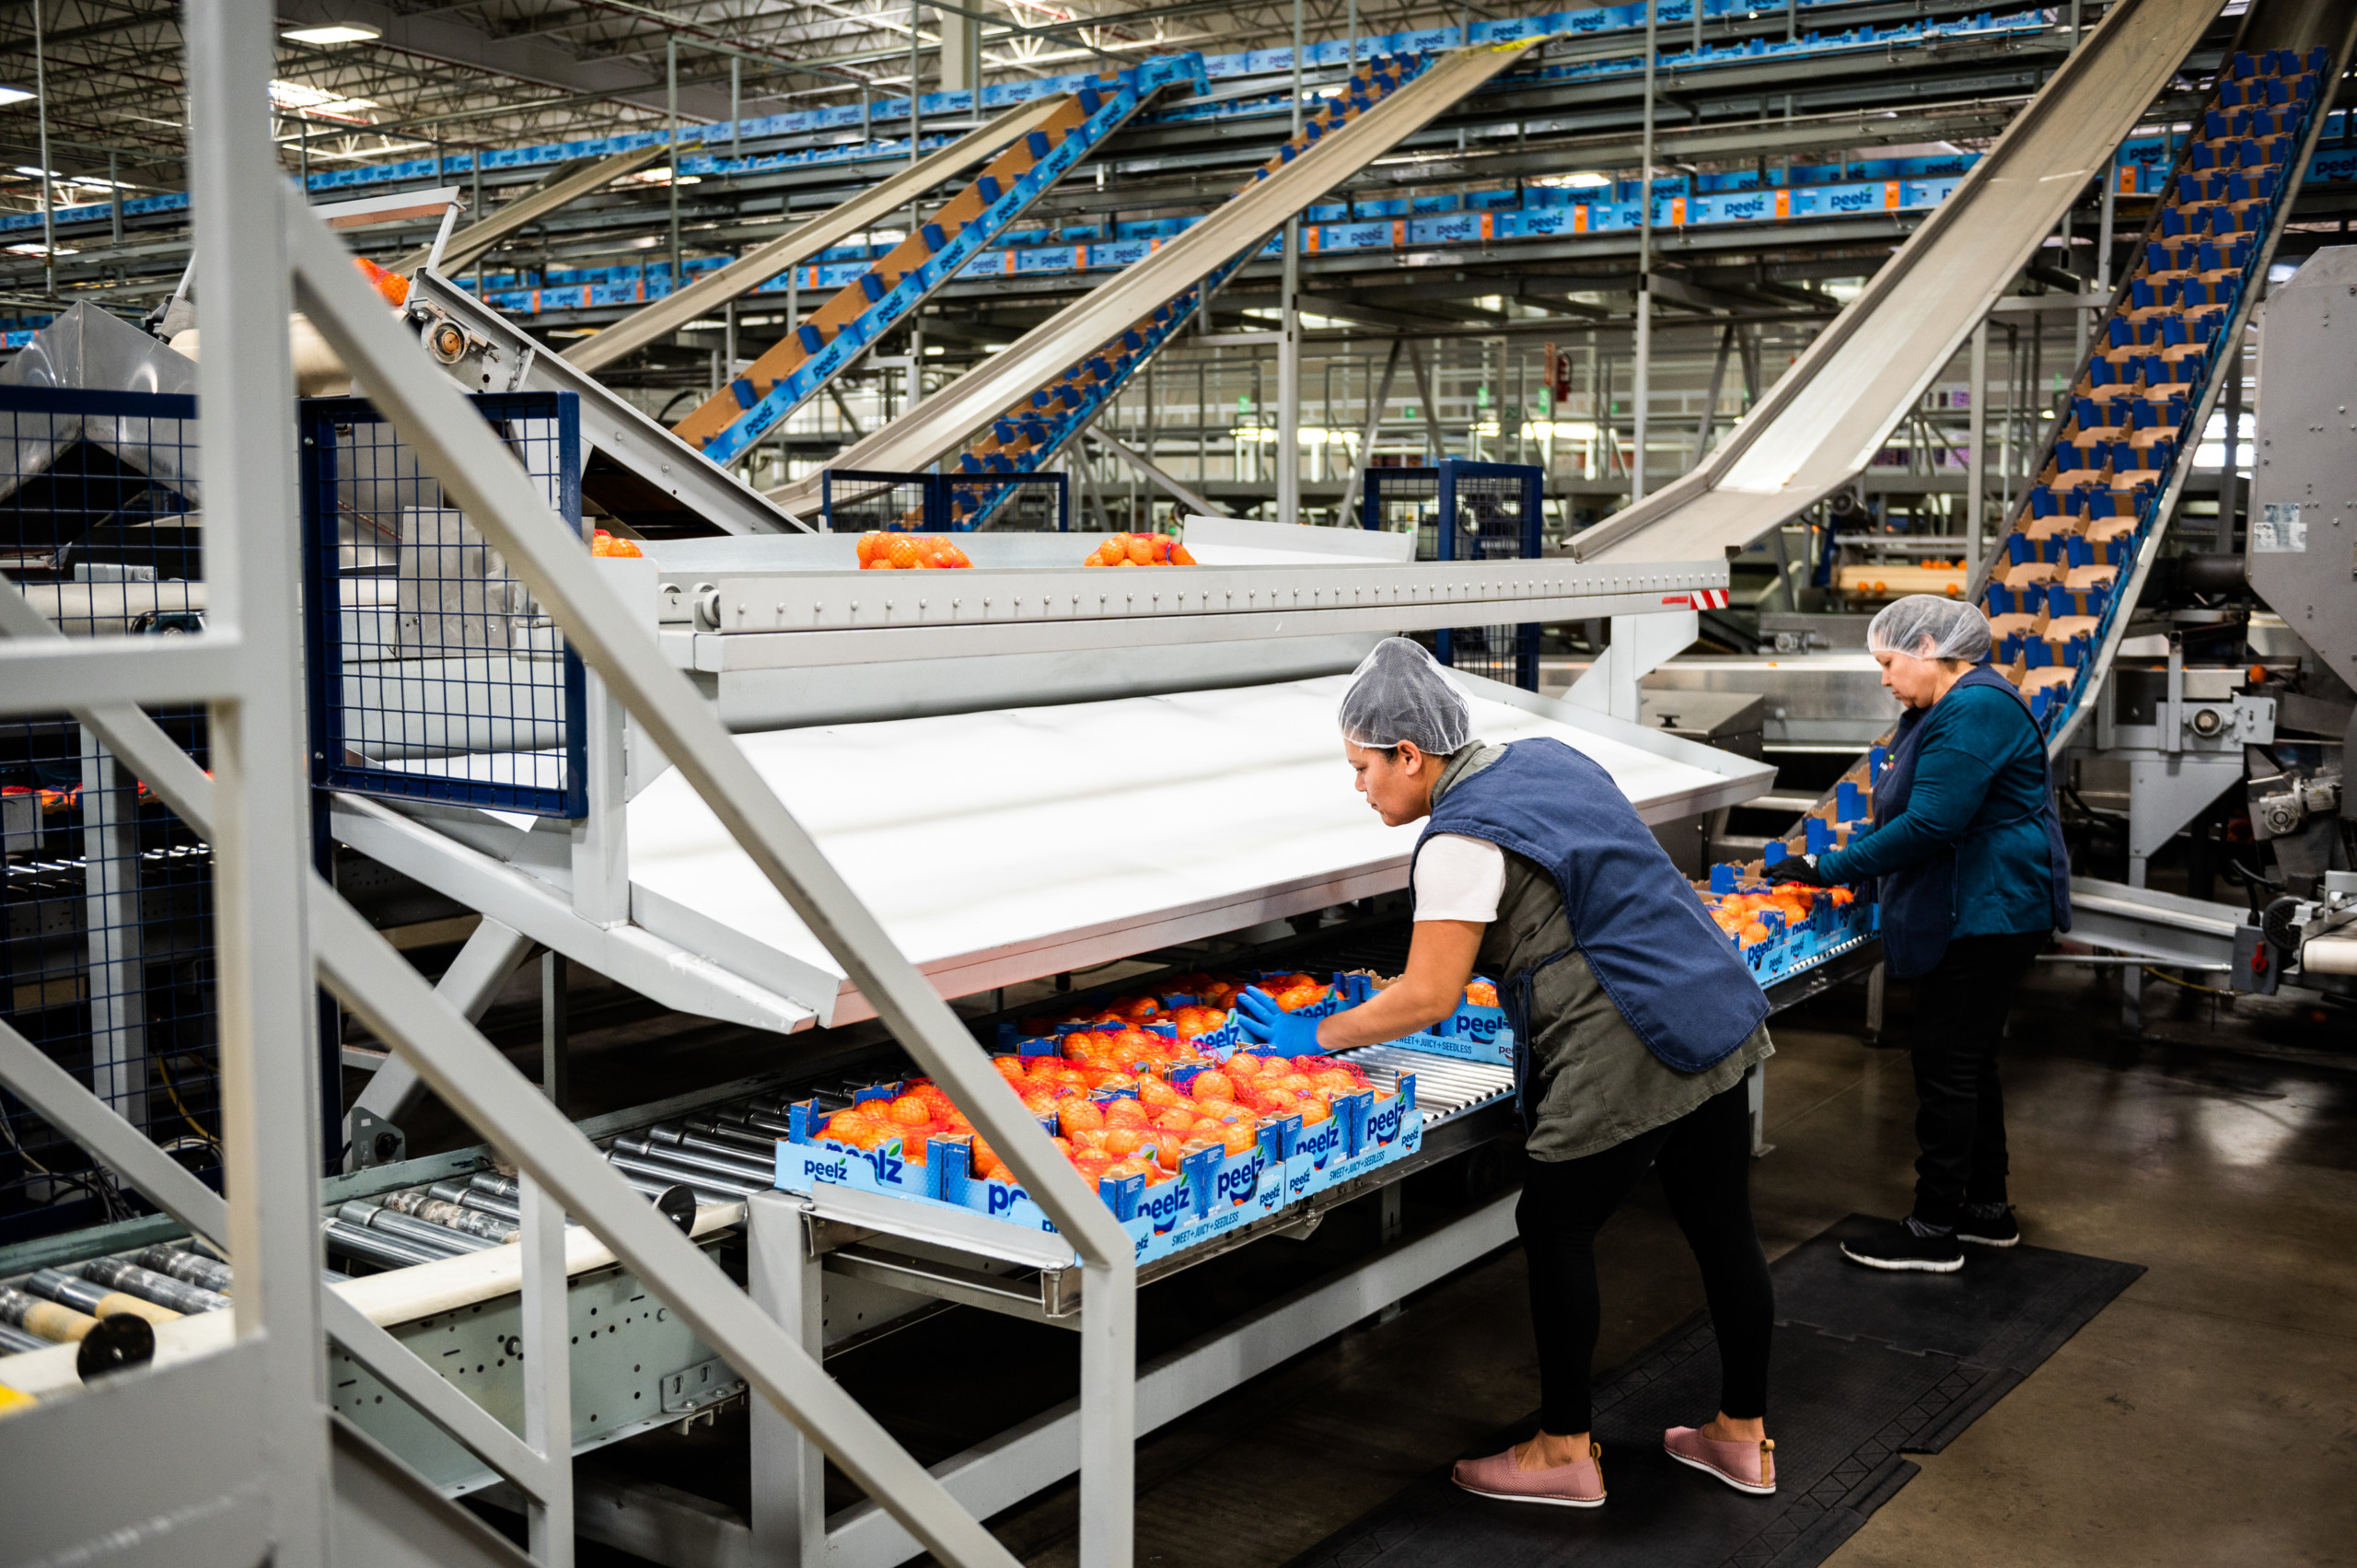 Fowler Packing employees load bags of mandarins in to boxes